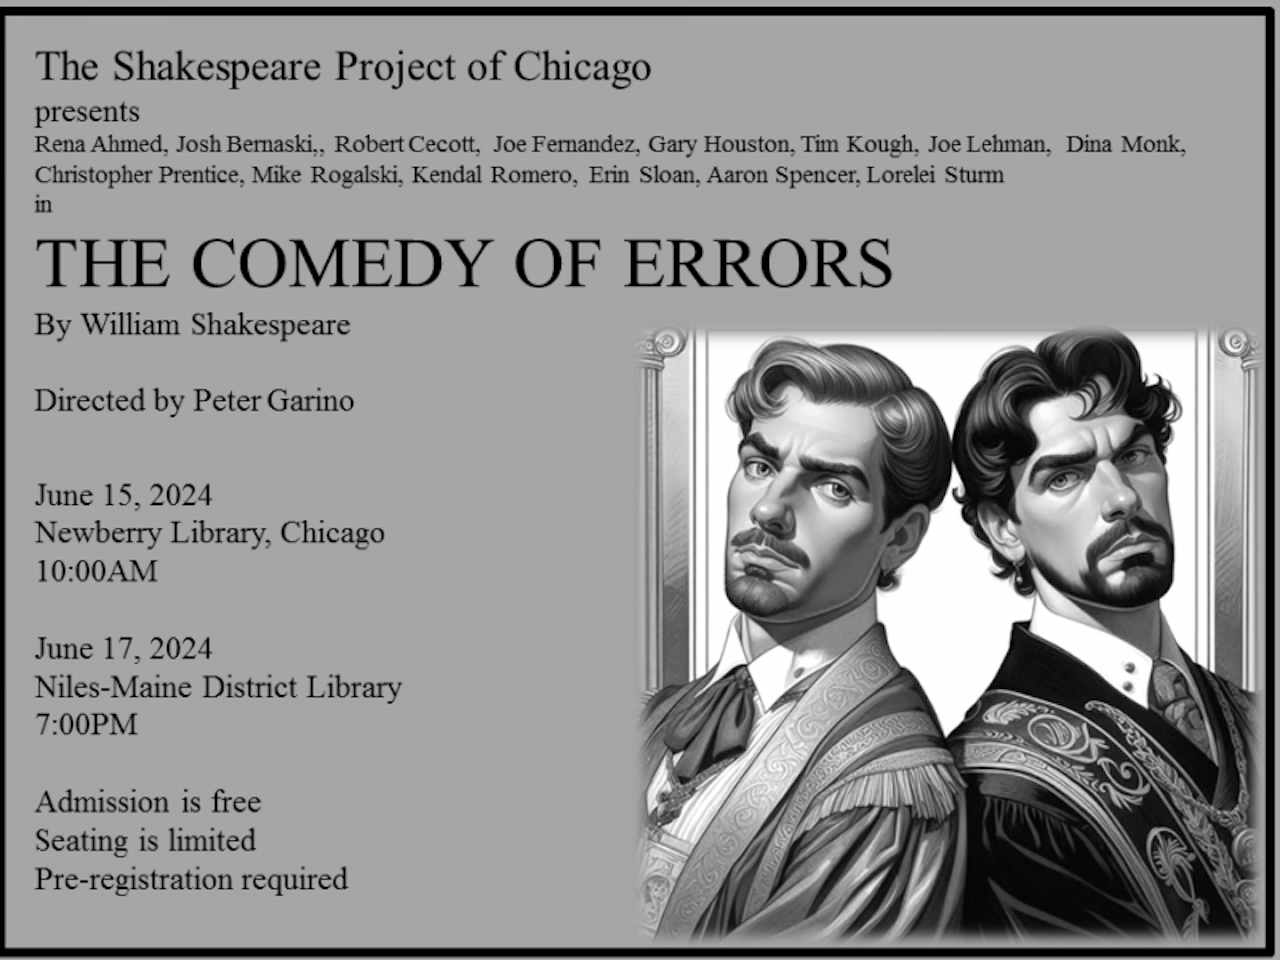 The Comedy of Errors 2024 poster for The Shakespeare Project of Chicago